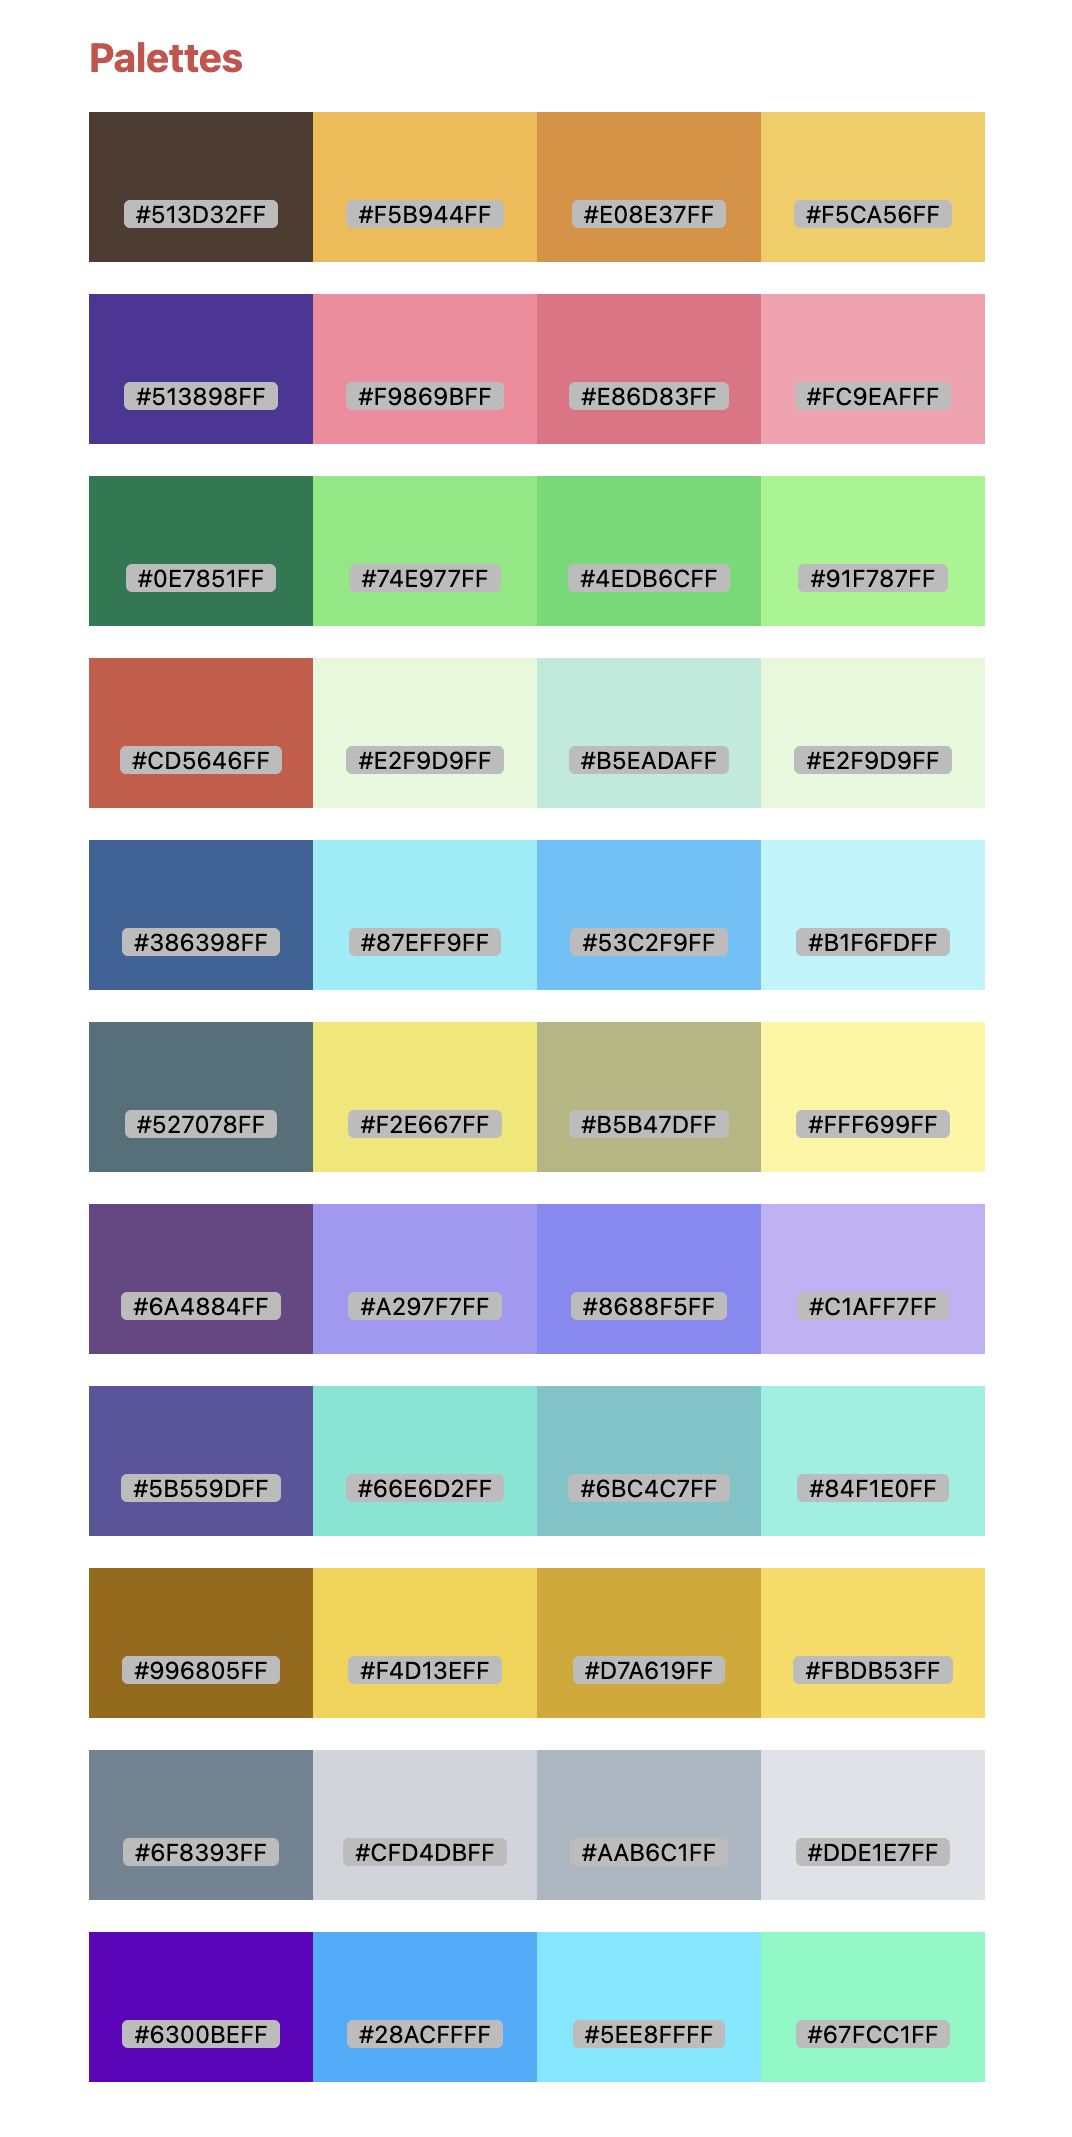 Grid of hex color values.